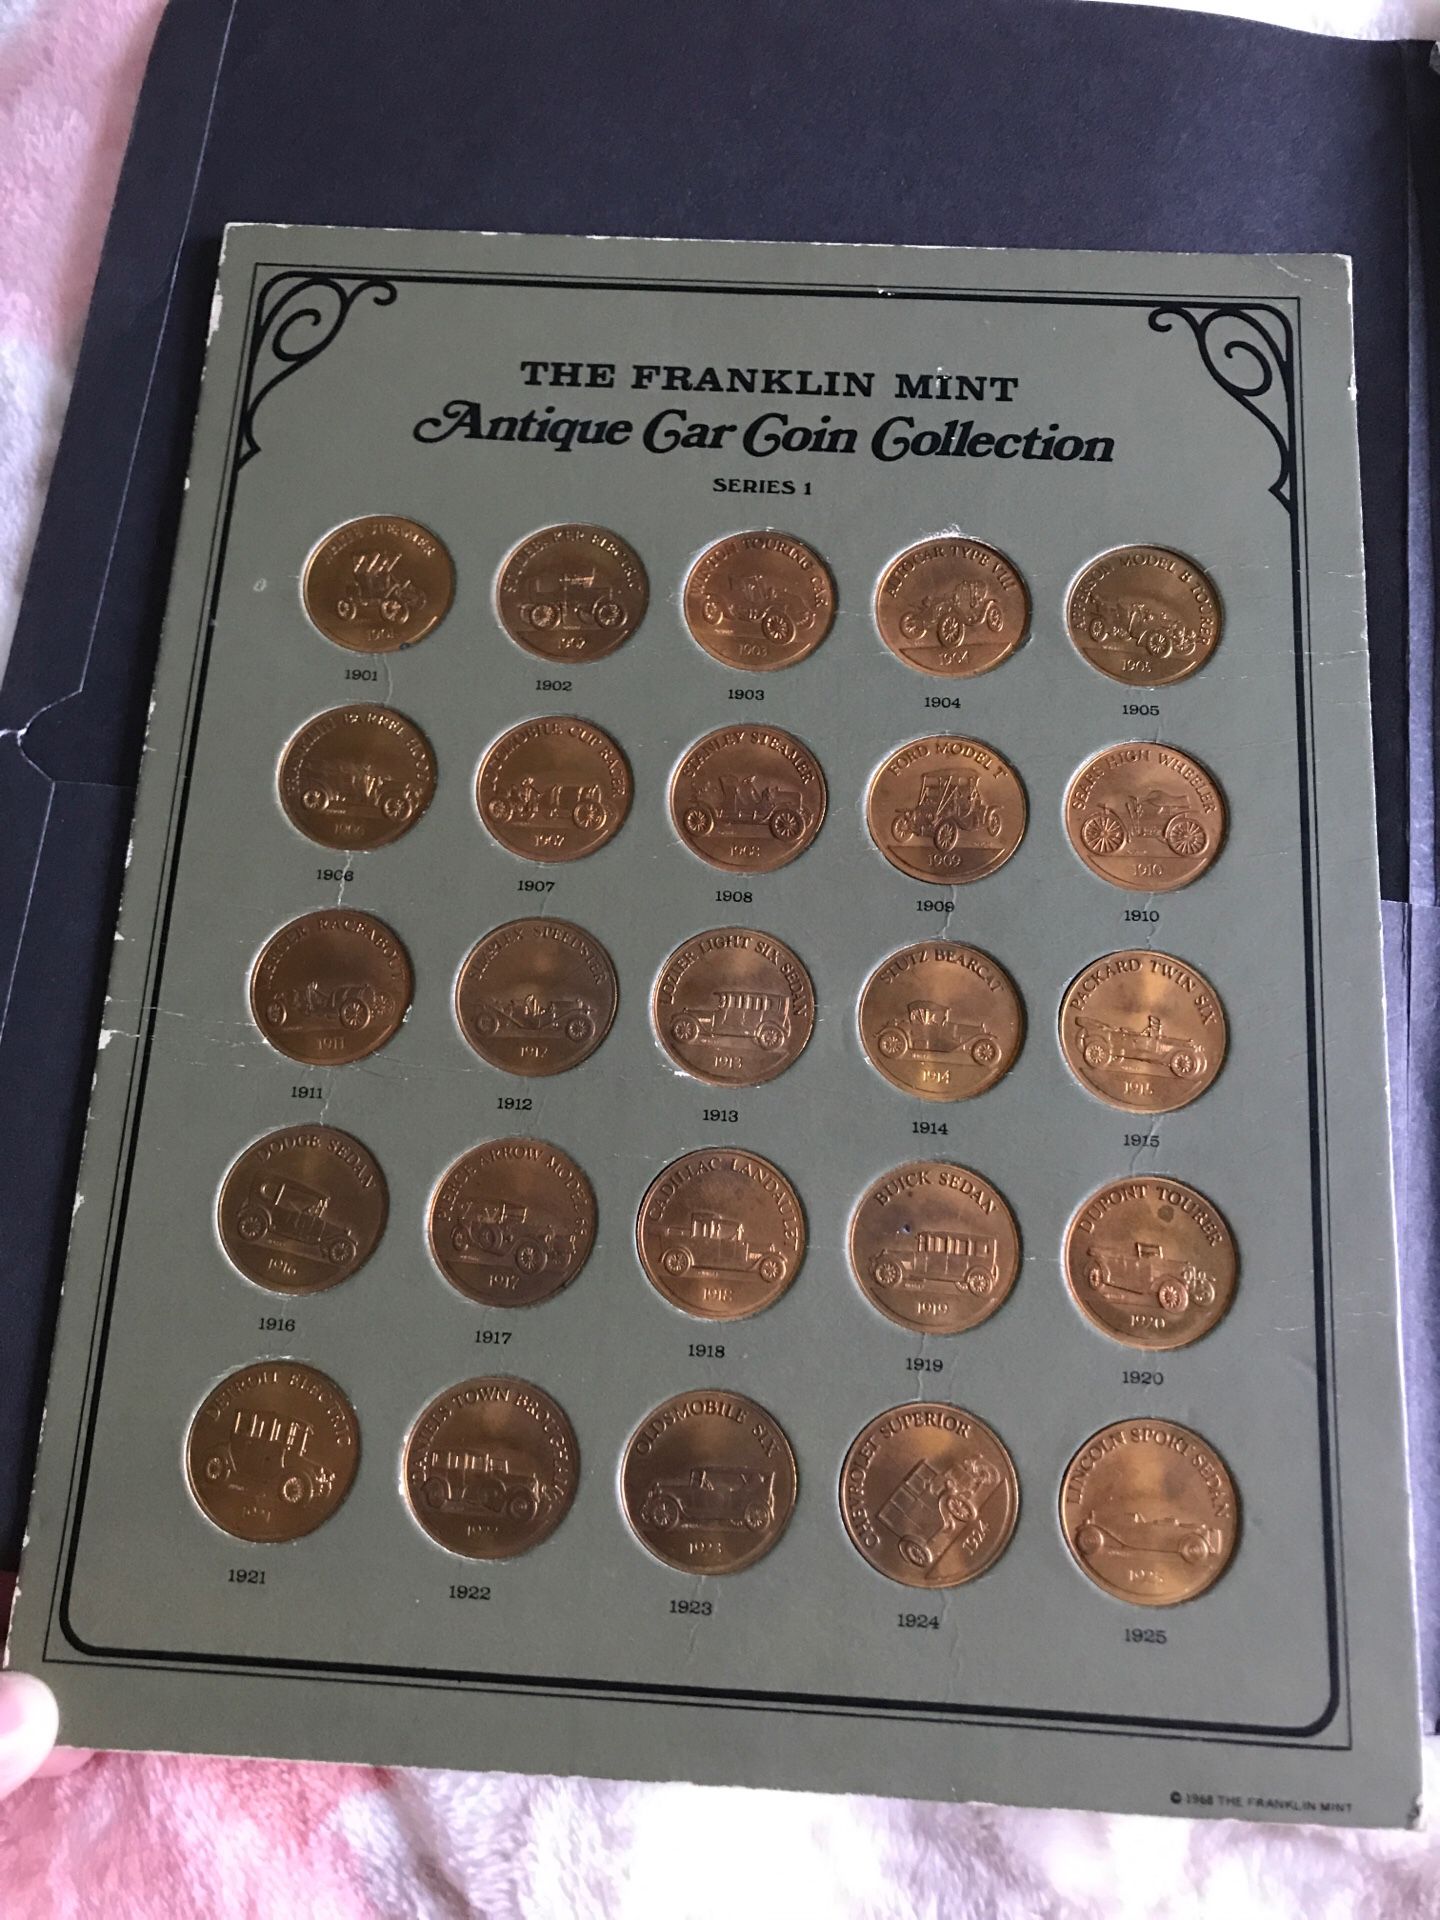 The franklin mint antique car coin collection